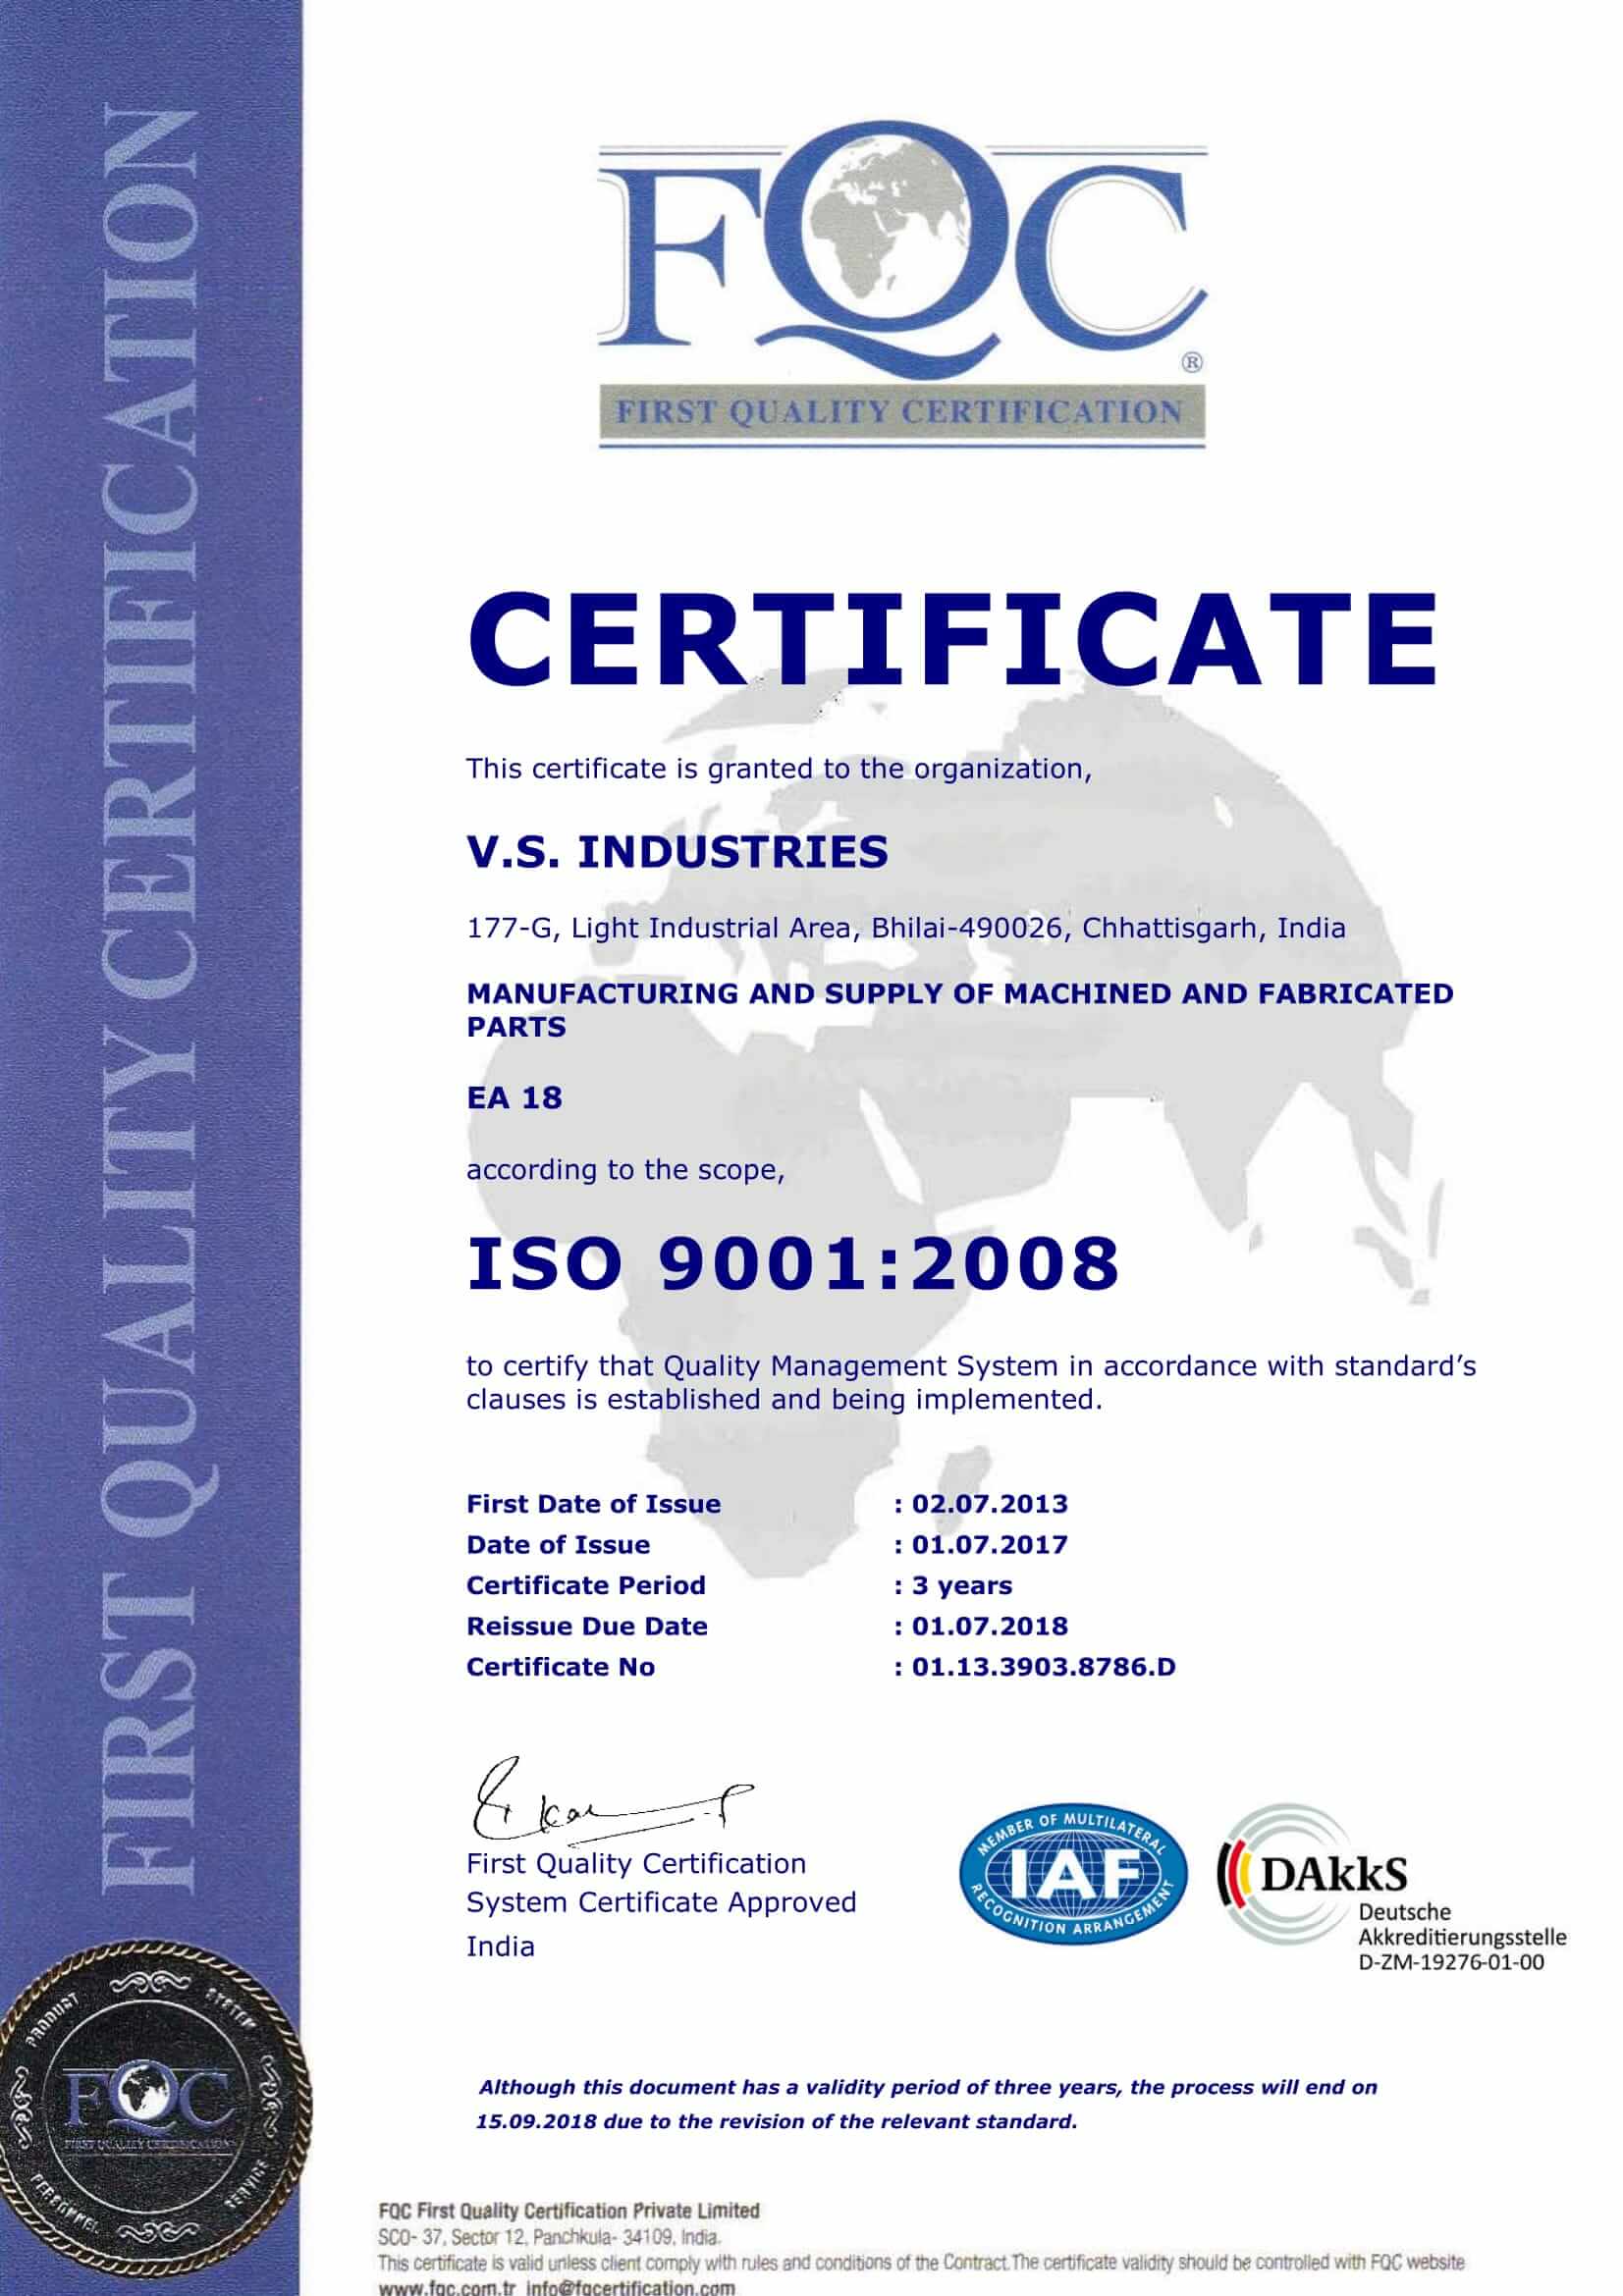 Integrated Quality Certificate